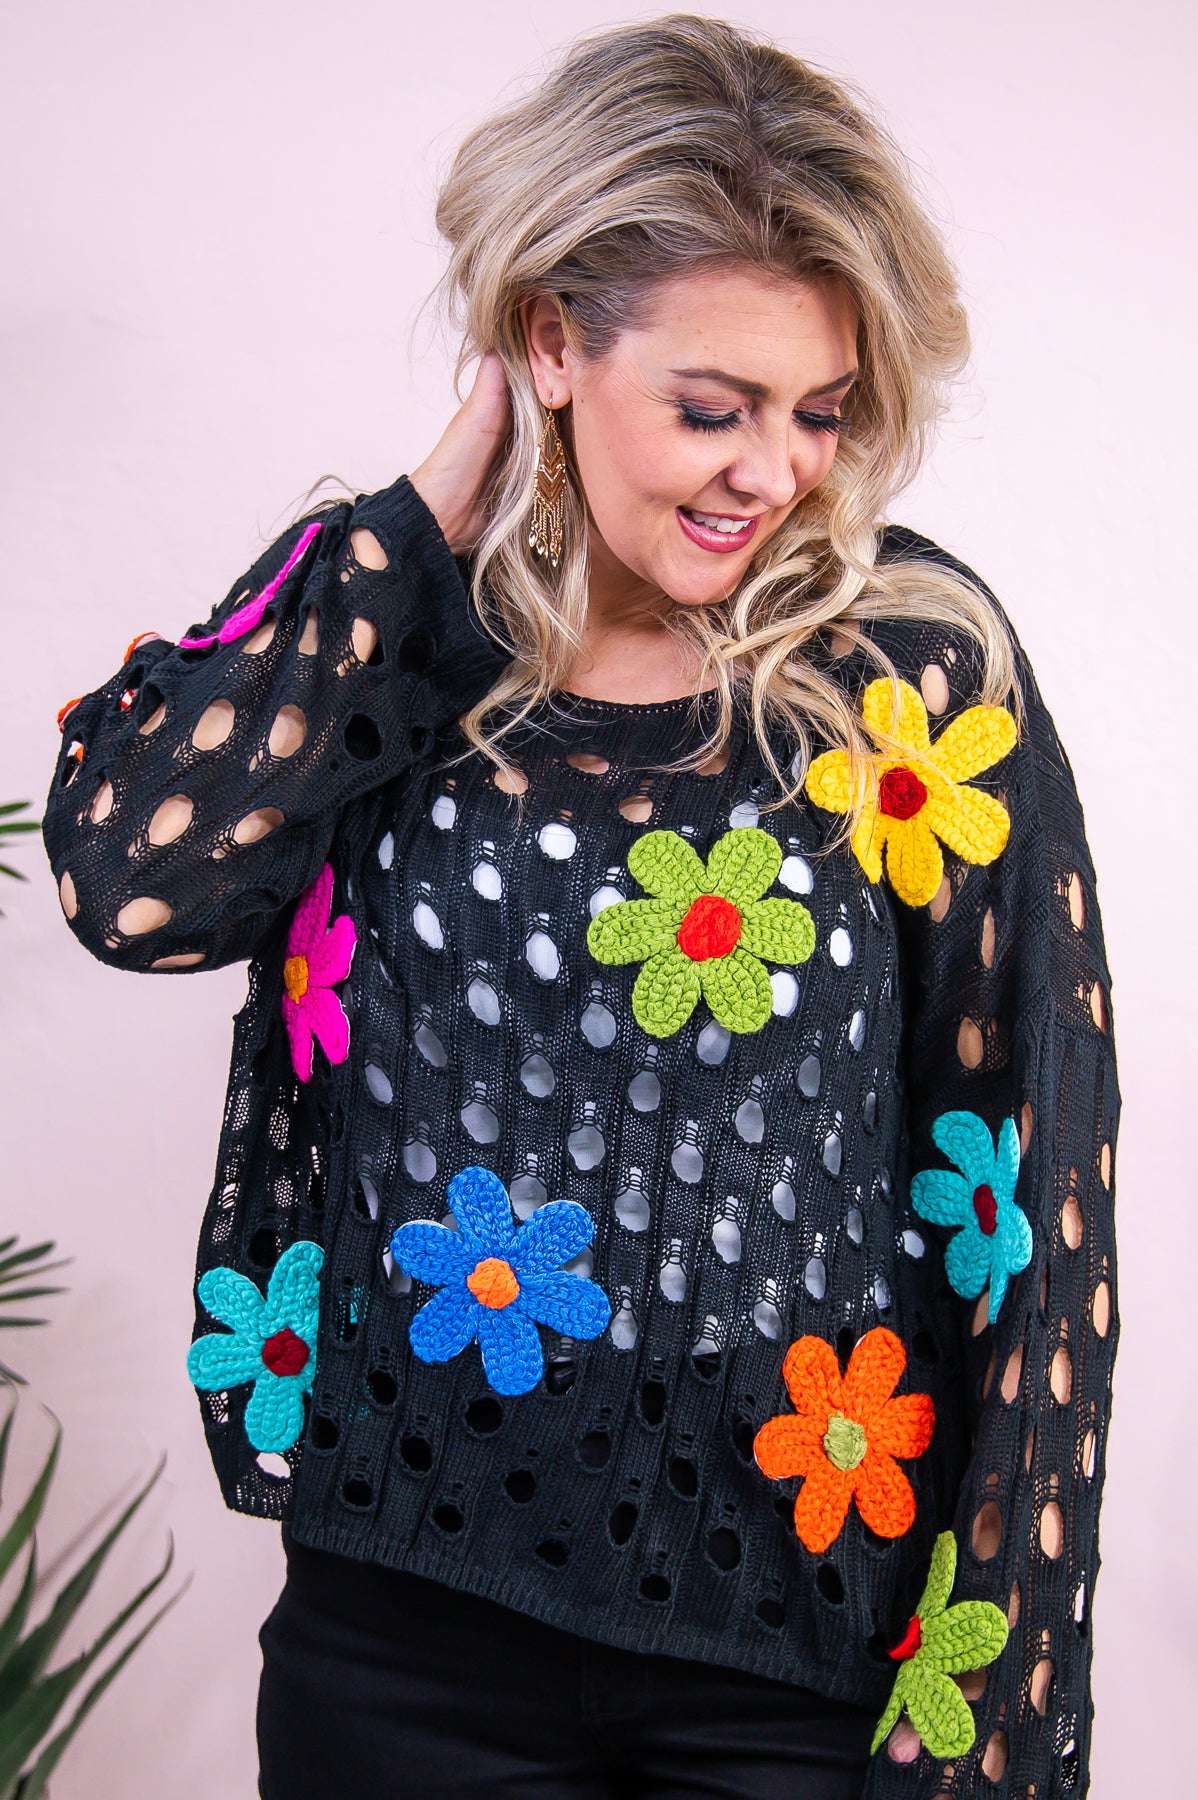 Let's Root For Each Other Black/Multi Color Floral Knitted Top - T9335BK